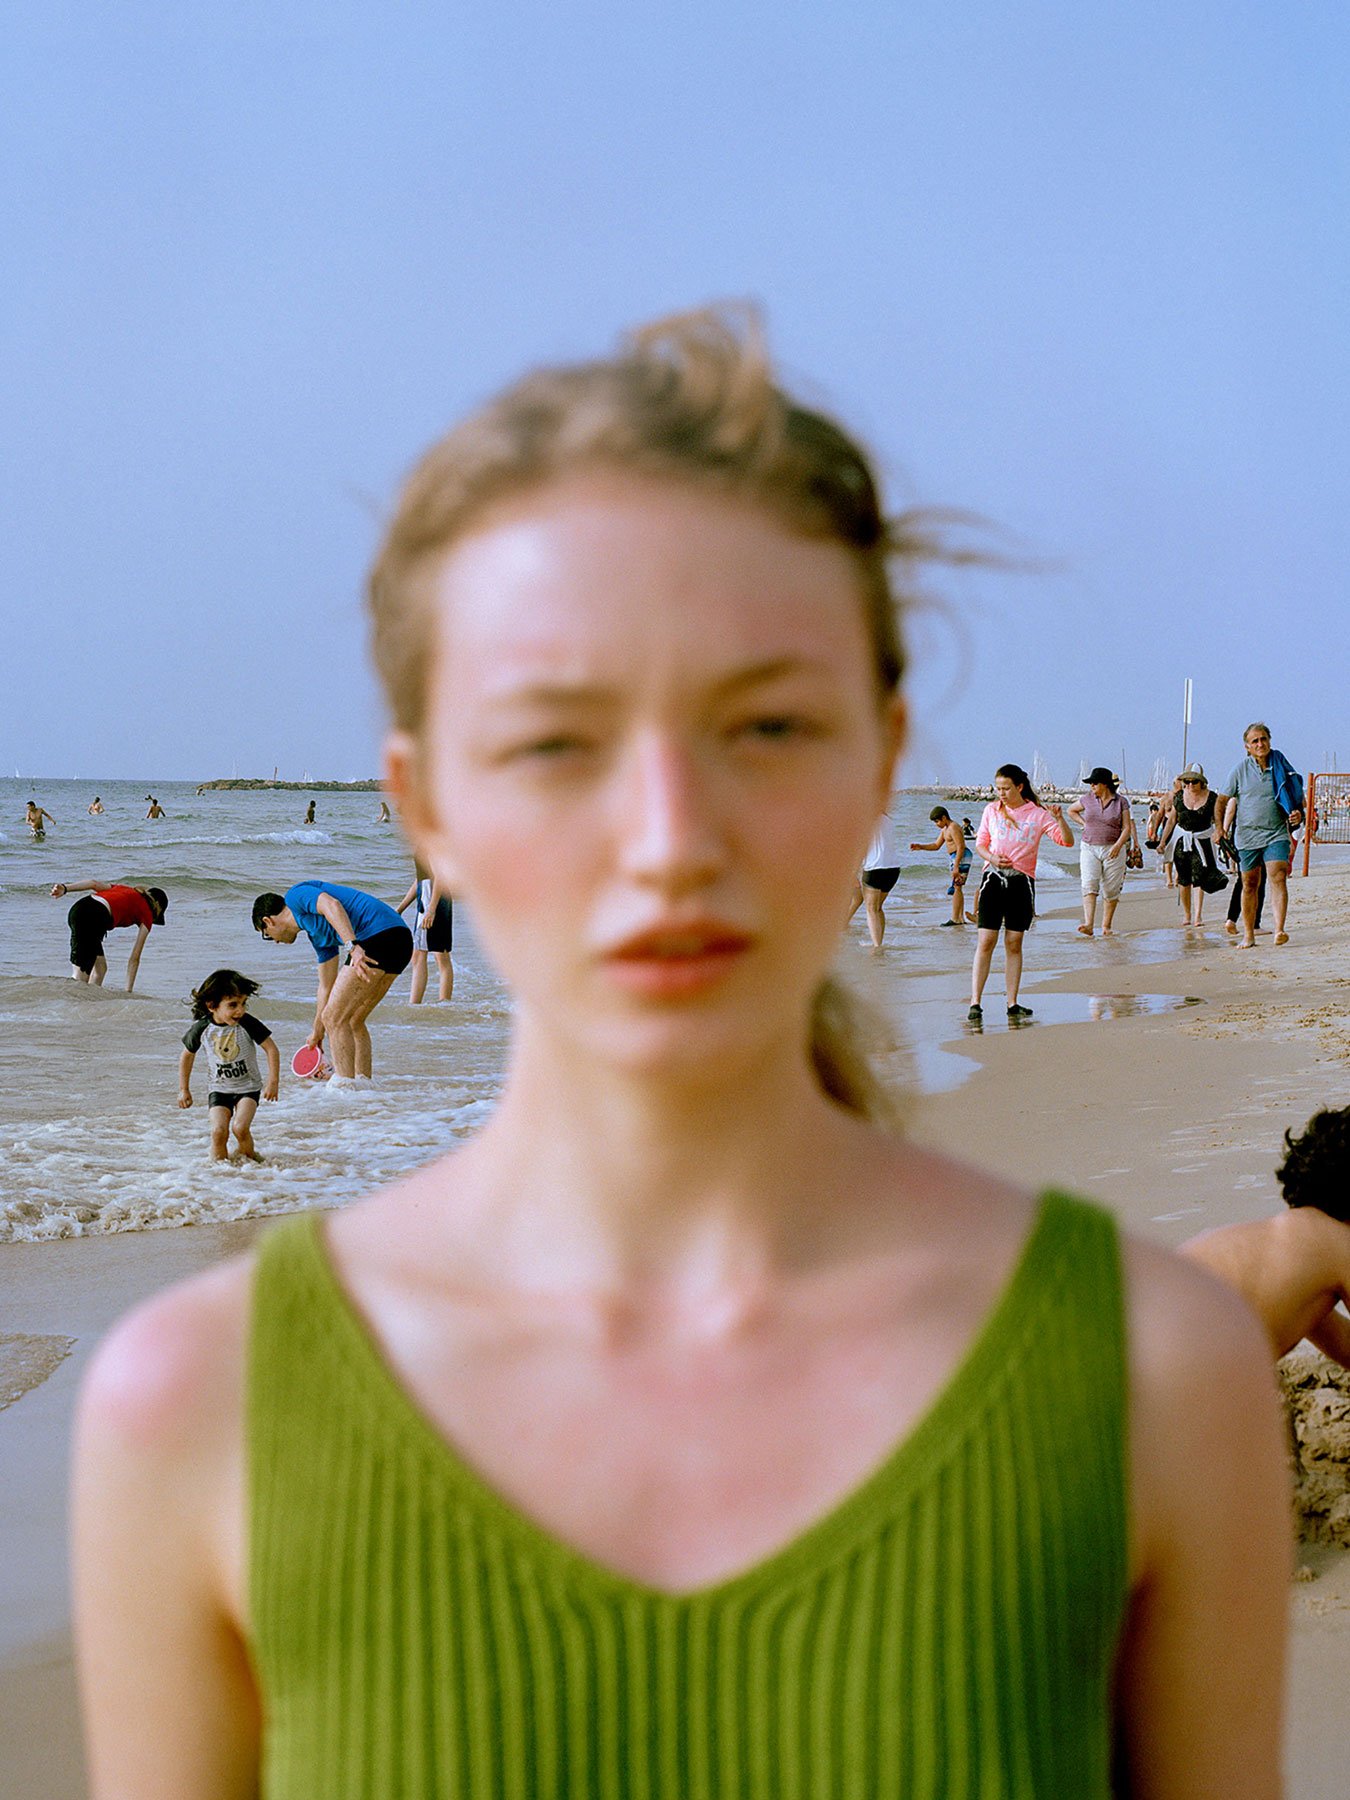 <p>Emmie America often works with fashion photography, but portraiture, movement and capturing each person’s character is central to her practice. This photo was taken on a beach in Tel Aviv, reflecting its hectic surroundings in the blazing sun. </p>